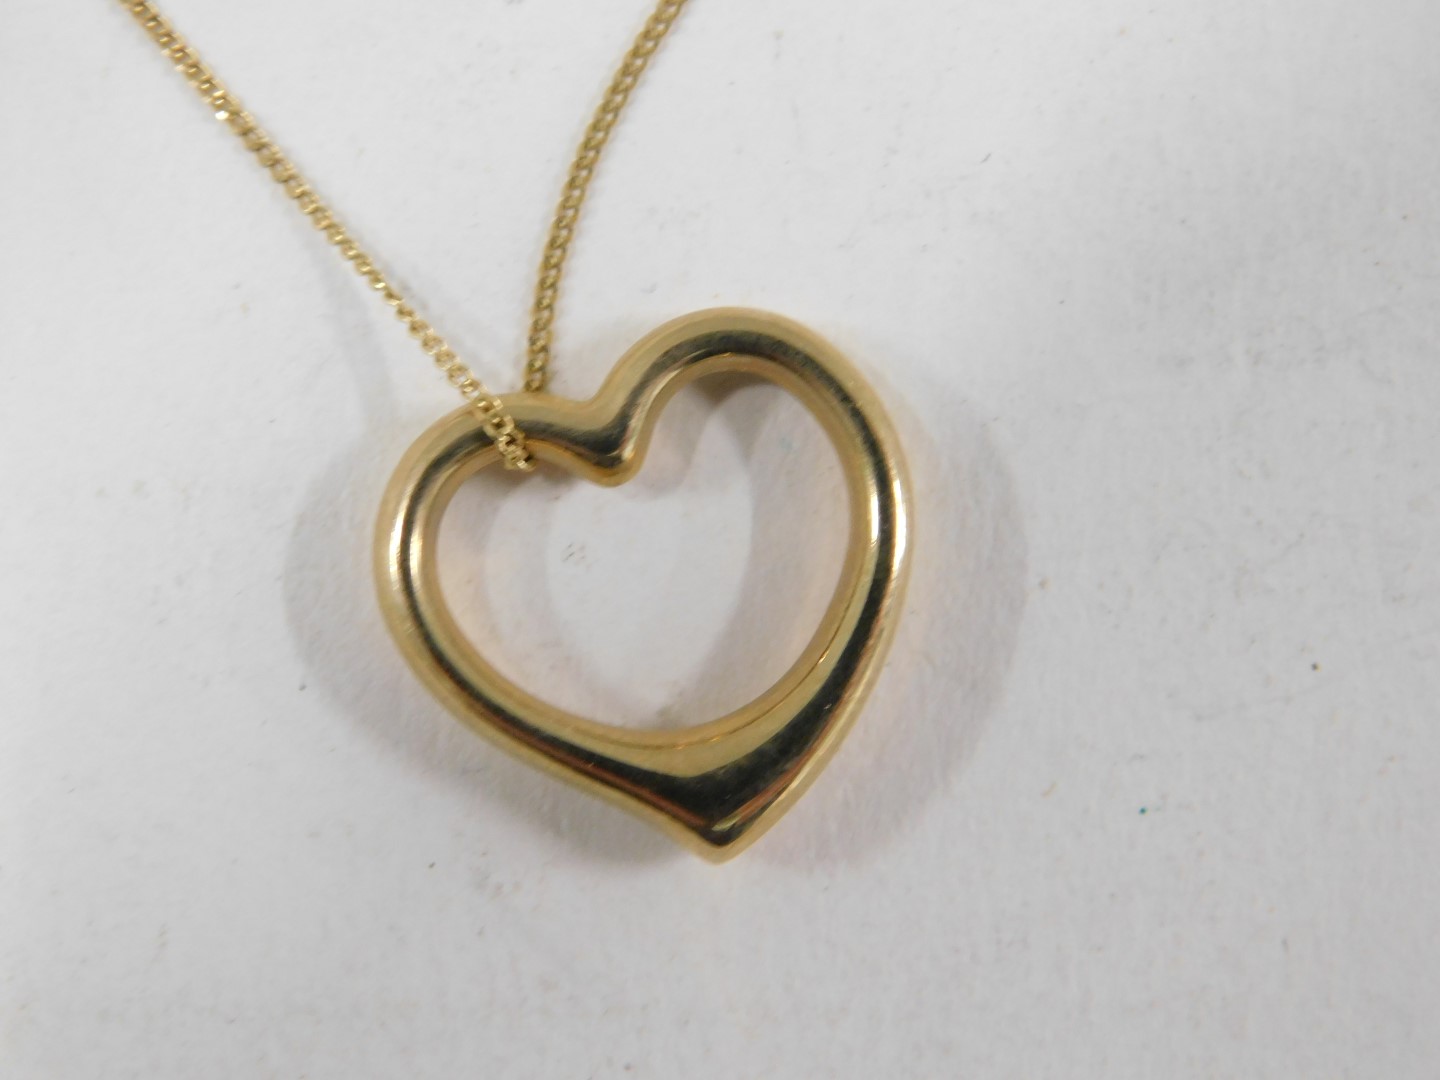 A 9ct gold heart shaped pendant and chain, the hollow heart 2cm high, on a fine link neck chain, 44c - Image 3 of 3